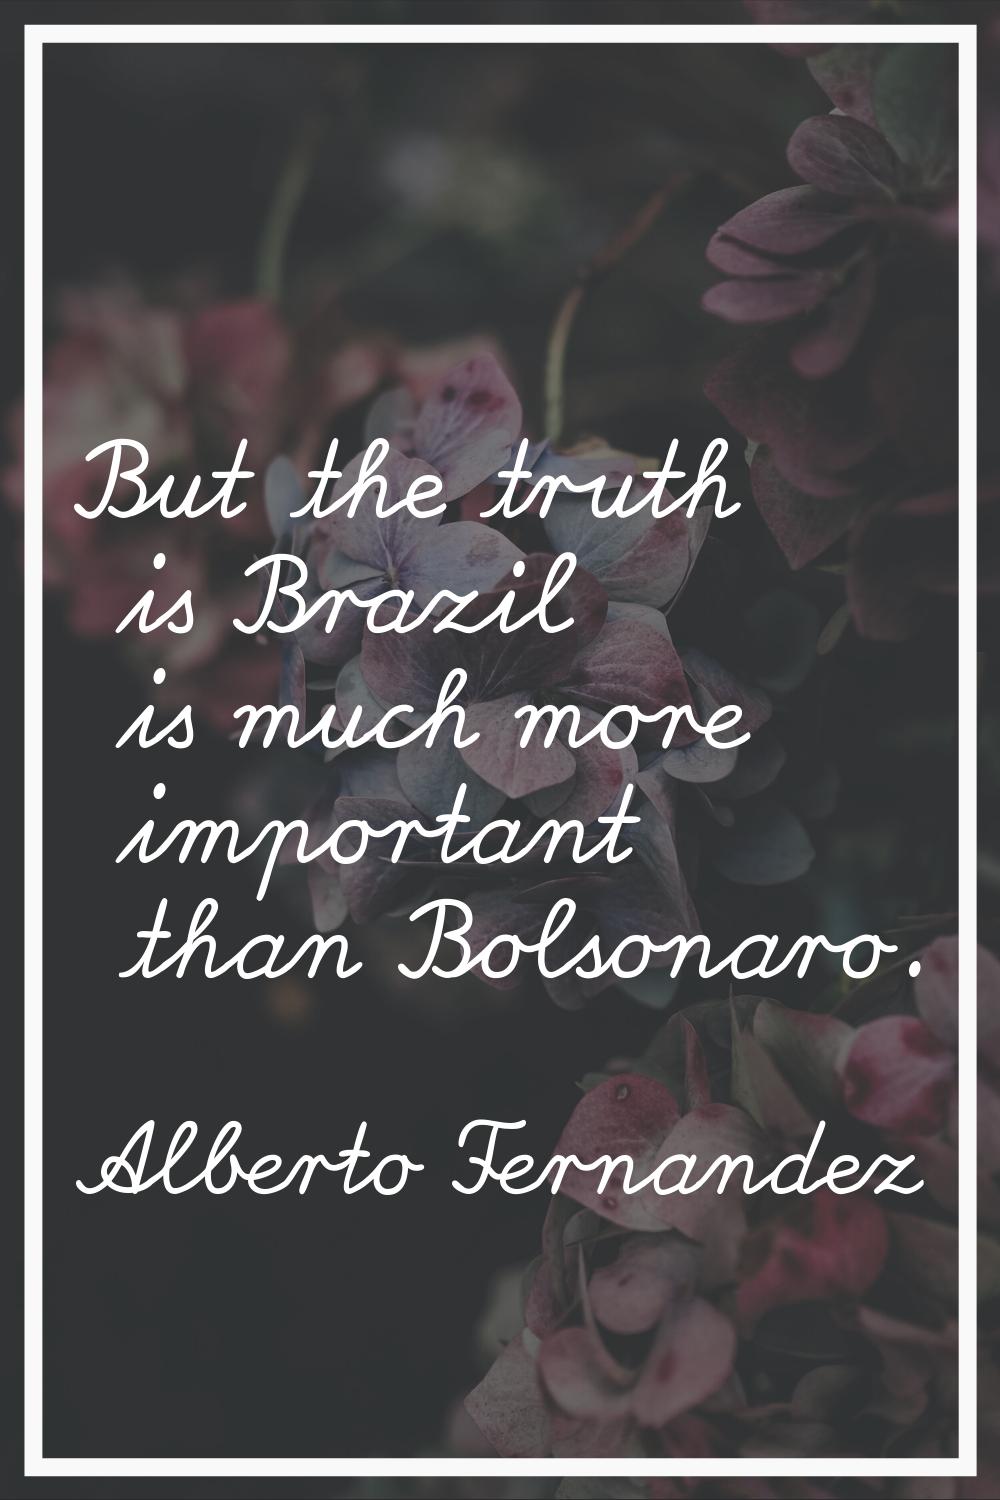 But the truth is Brazil is much more important than Bolsonaro.